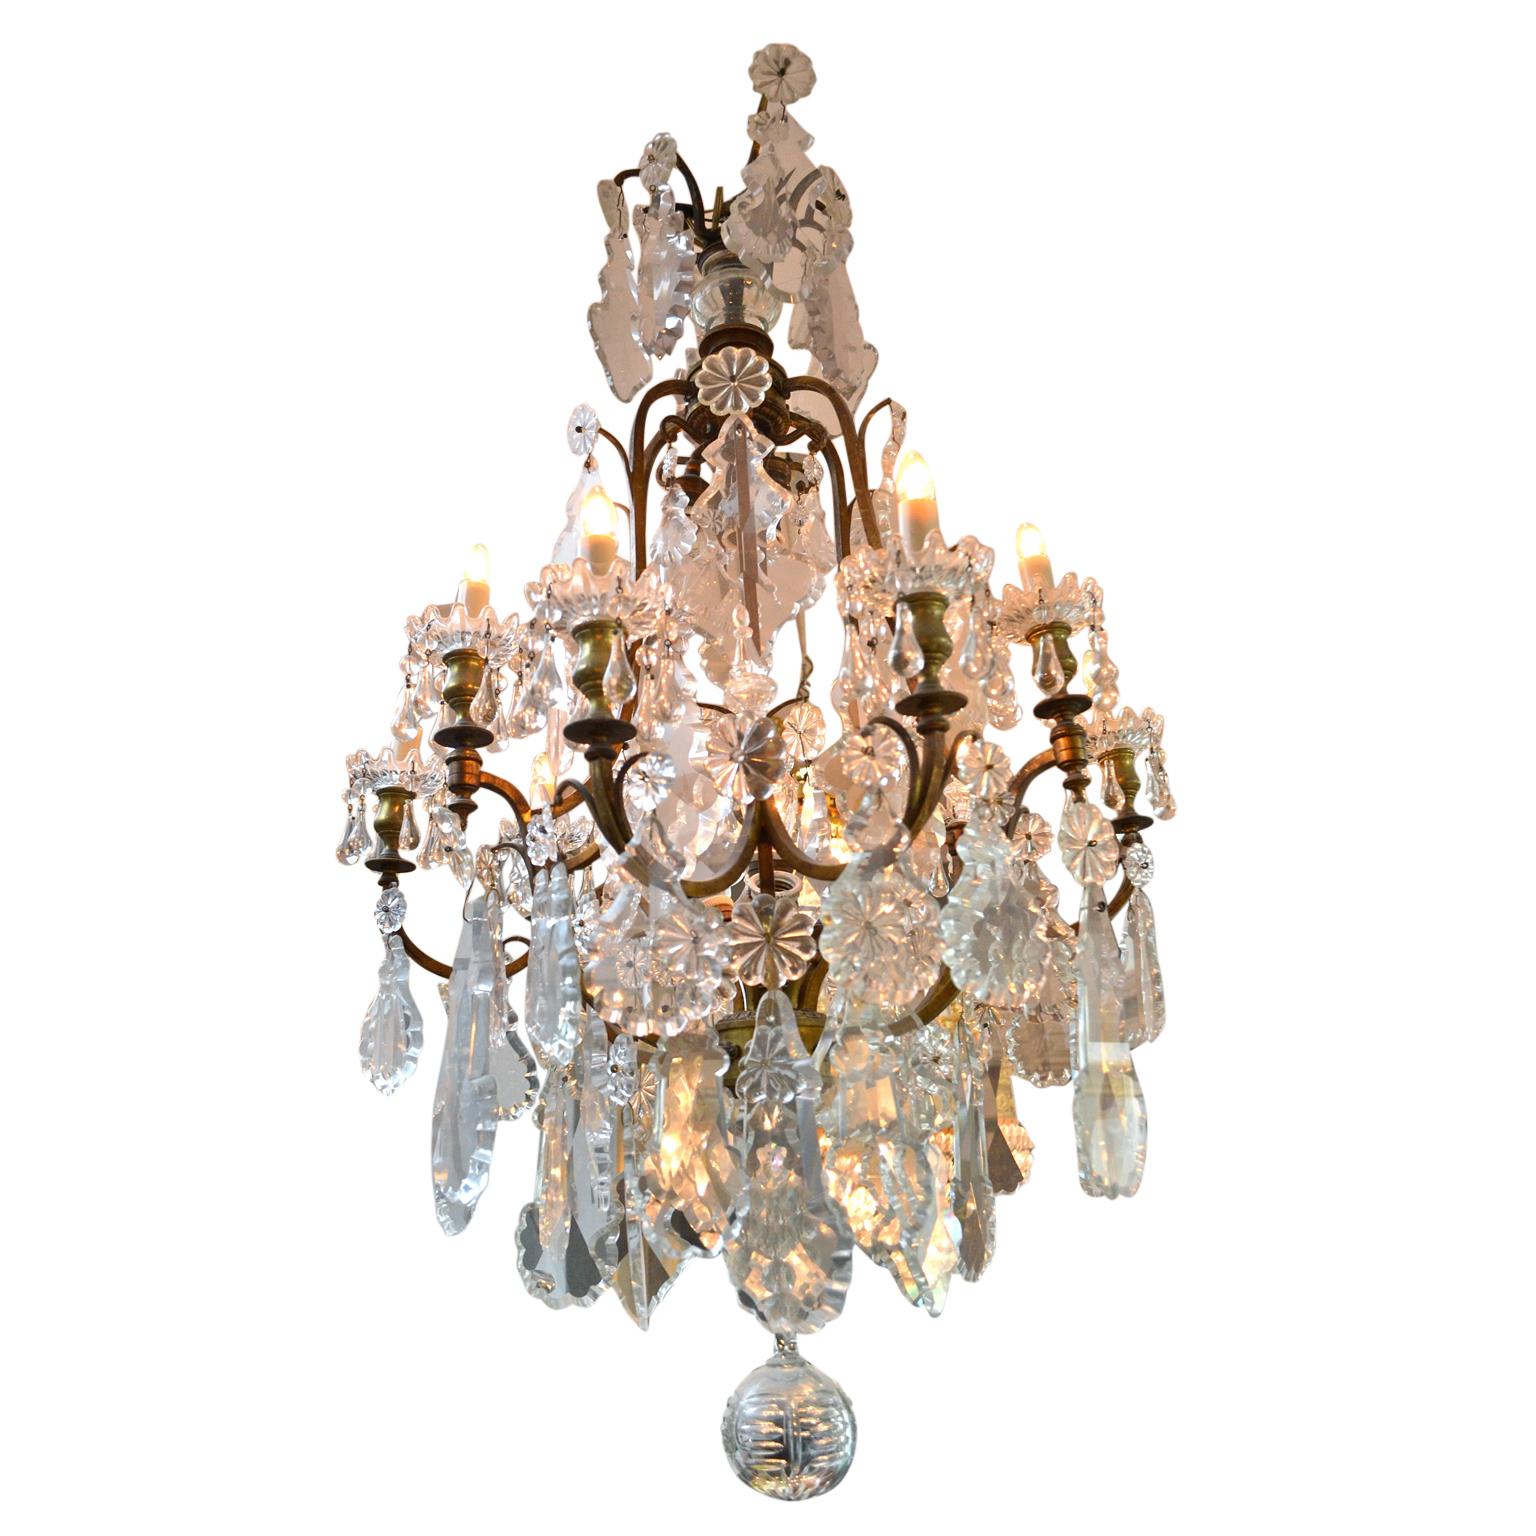 A Classic Louis XV style chandelier of birdcage design having nine arms; the gilt metal frame heavily laden with various sized crystal plaquettes; originally candle lit but now completely electrified.